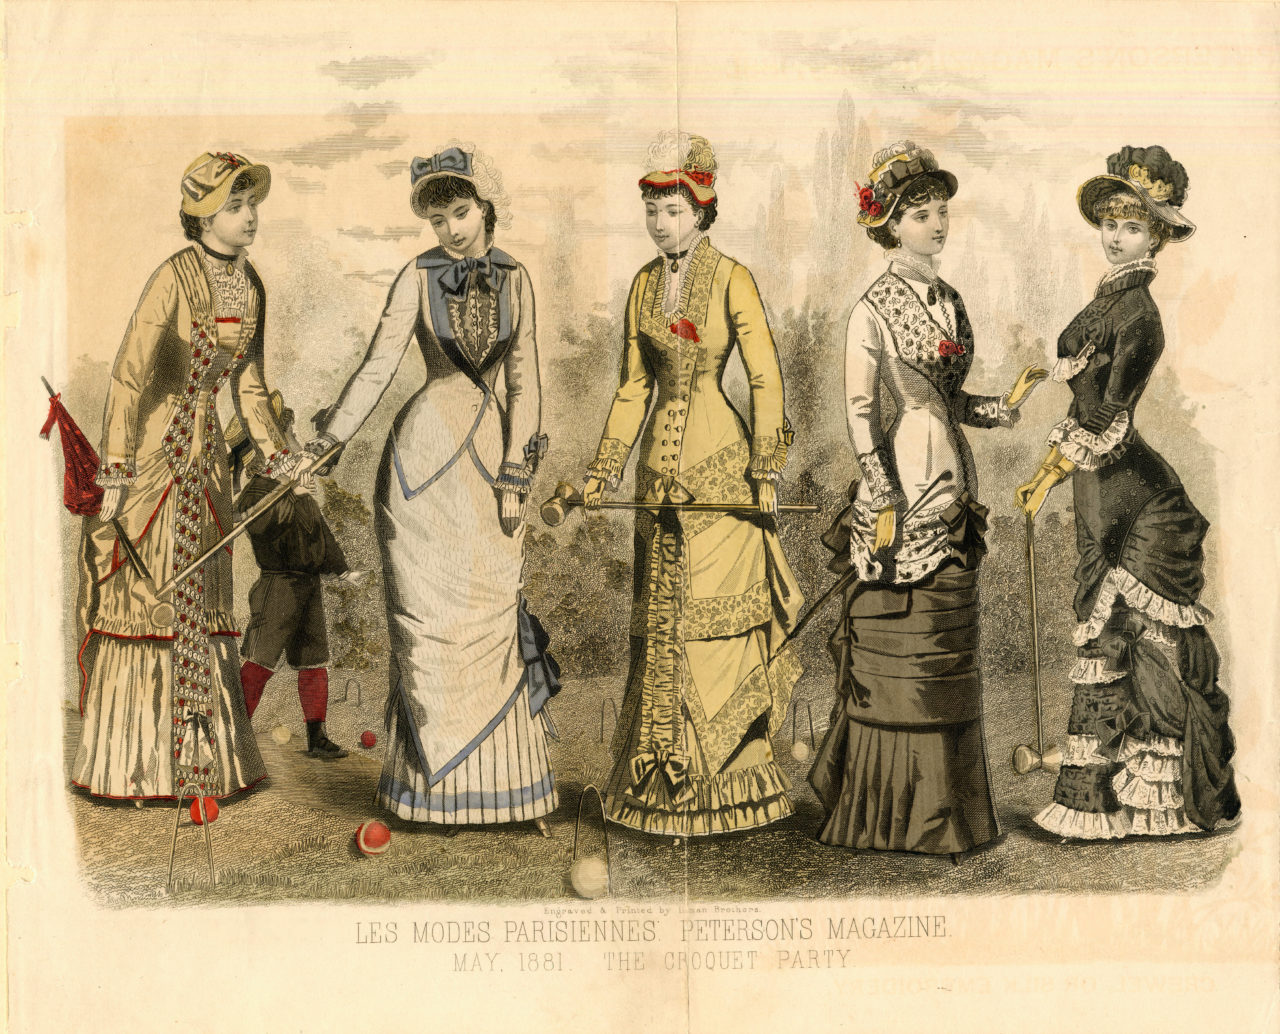 American fashions, Summer 1881 (Les Modes Parisiennes and Peterson's Magazine)